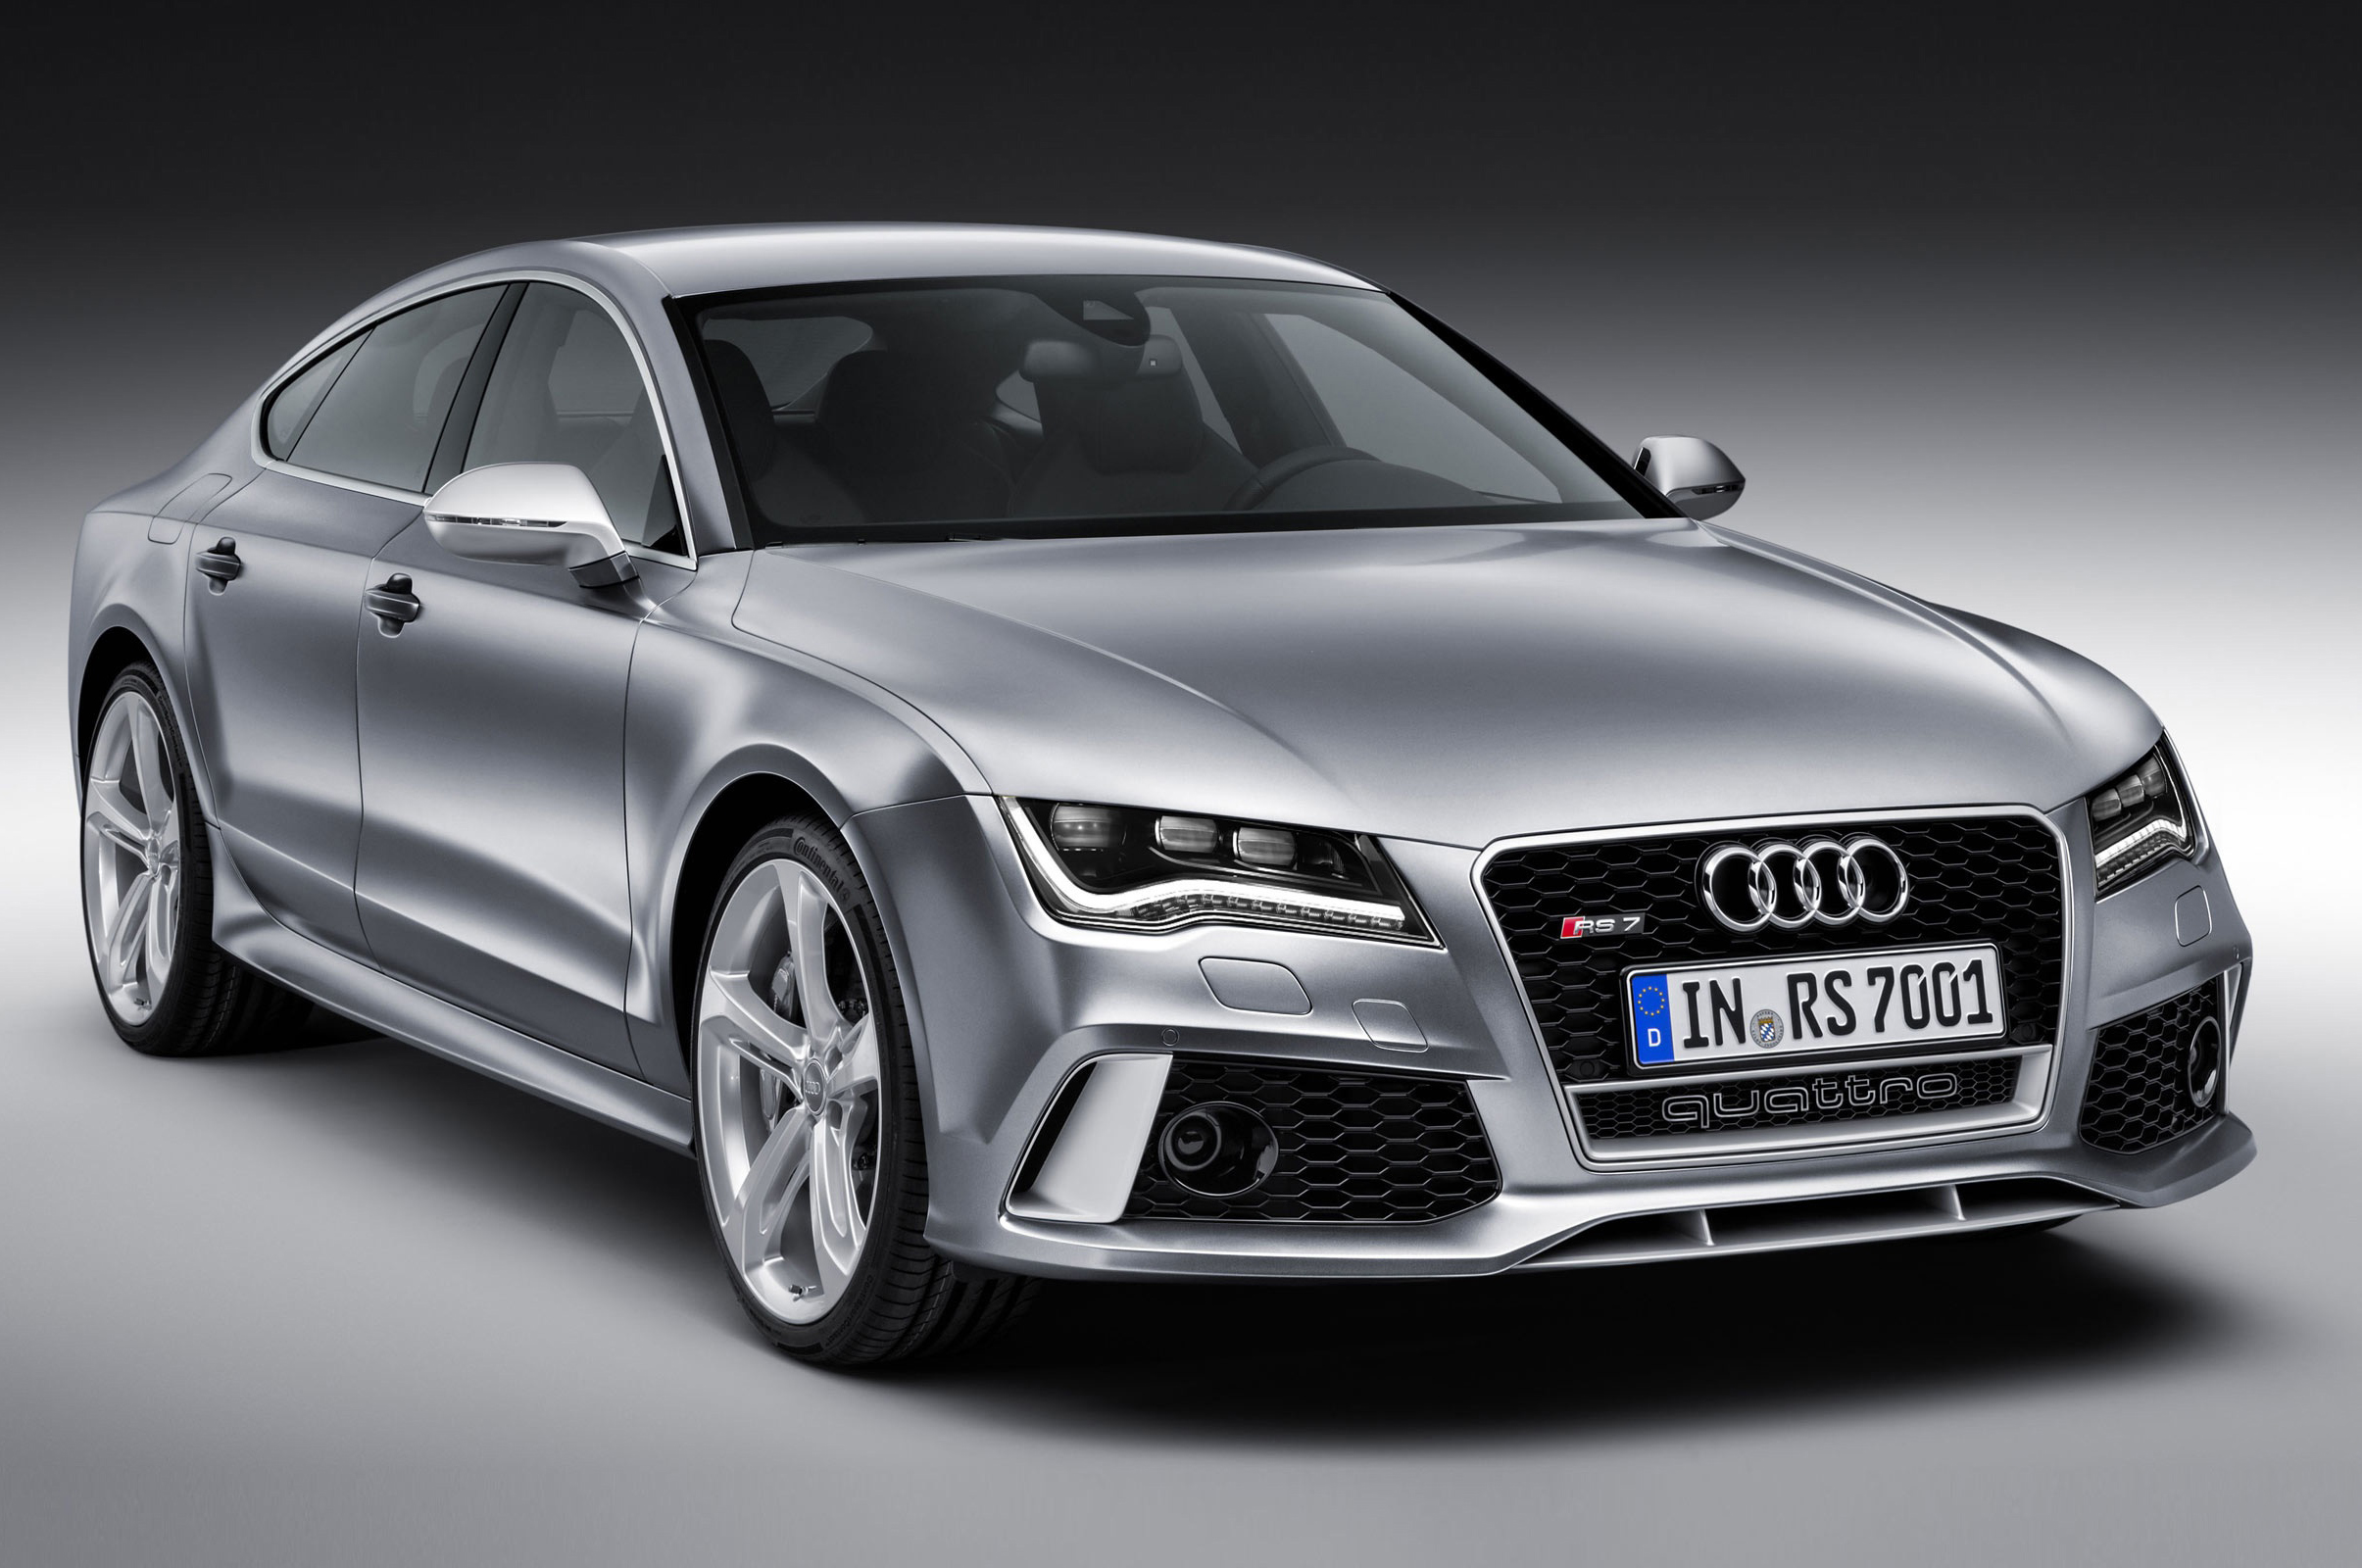 Audi Nails Elusive X-Factor in the New RS7 Sedan: Review